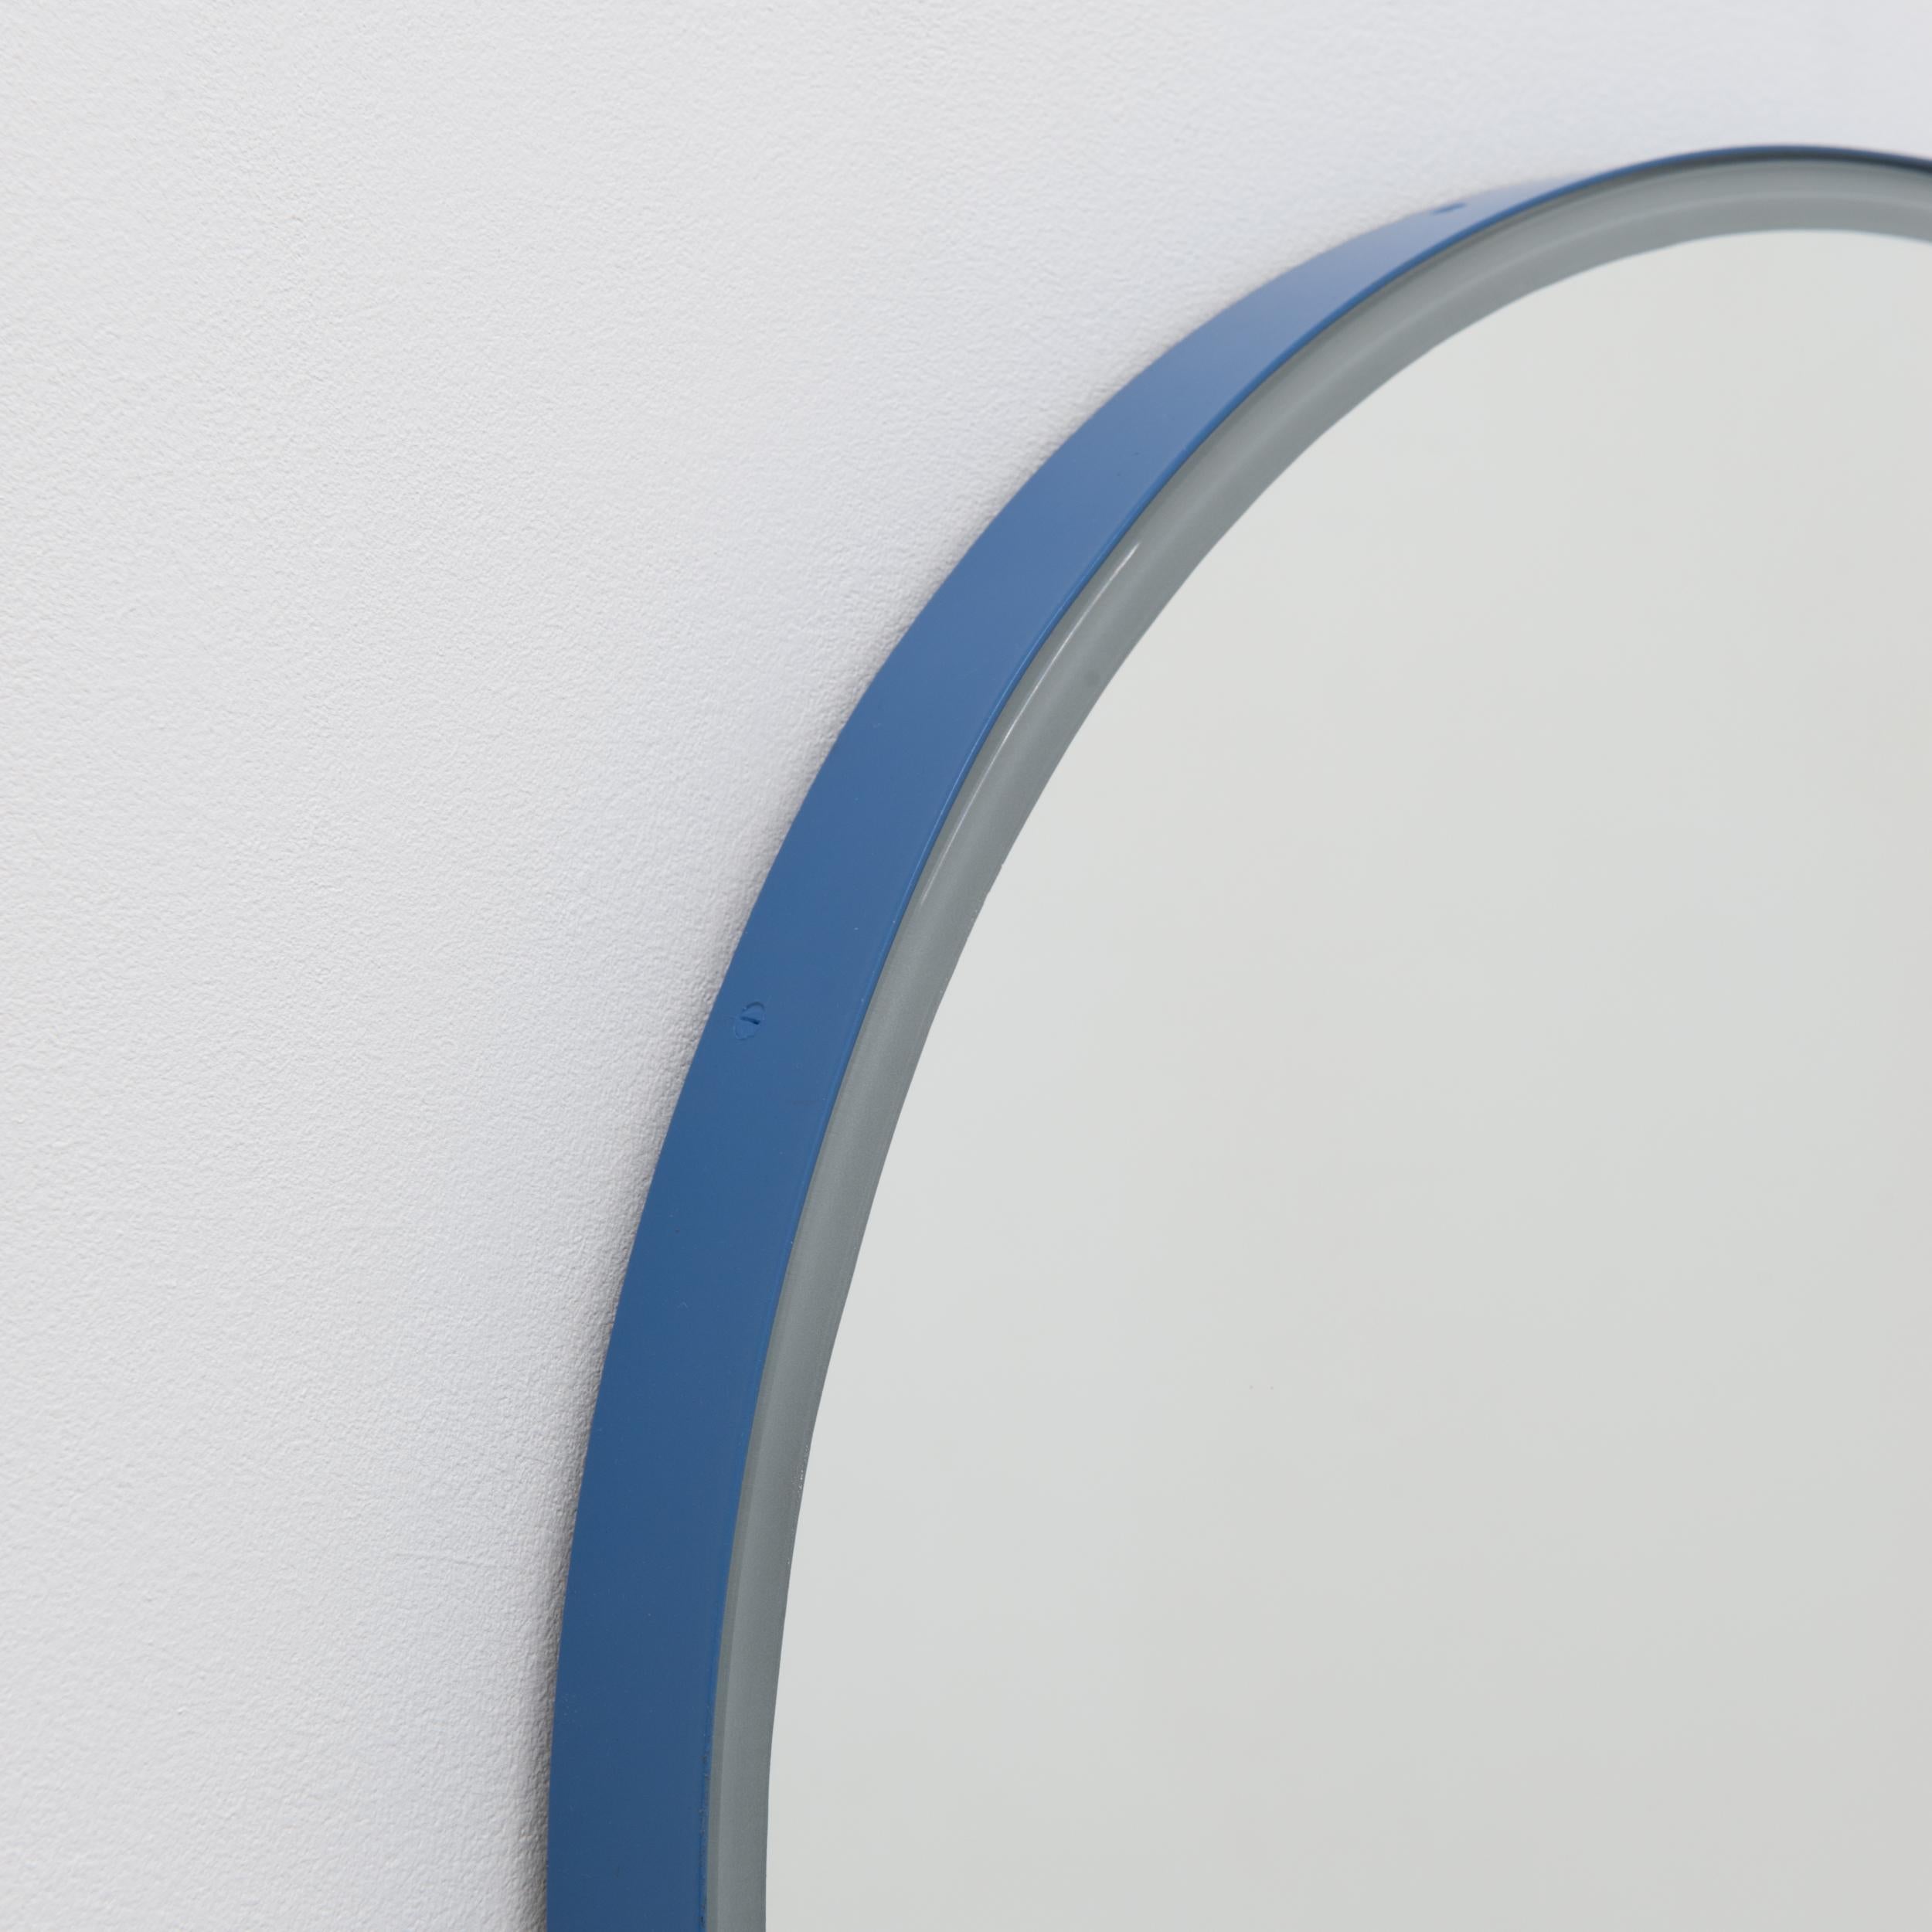 Orbis Front Illuminated Round Contemporary Mirror with Blue Frame, Medium For Sale 5